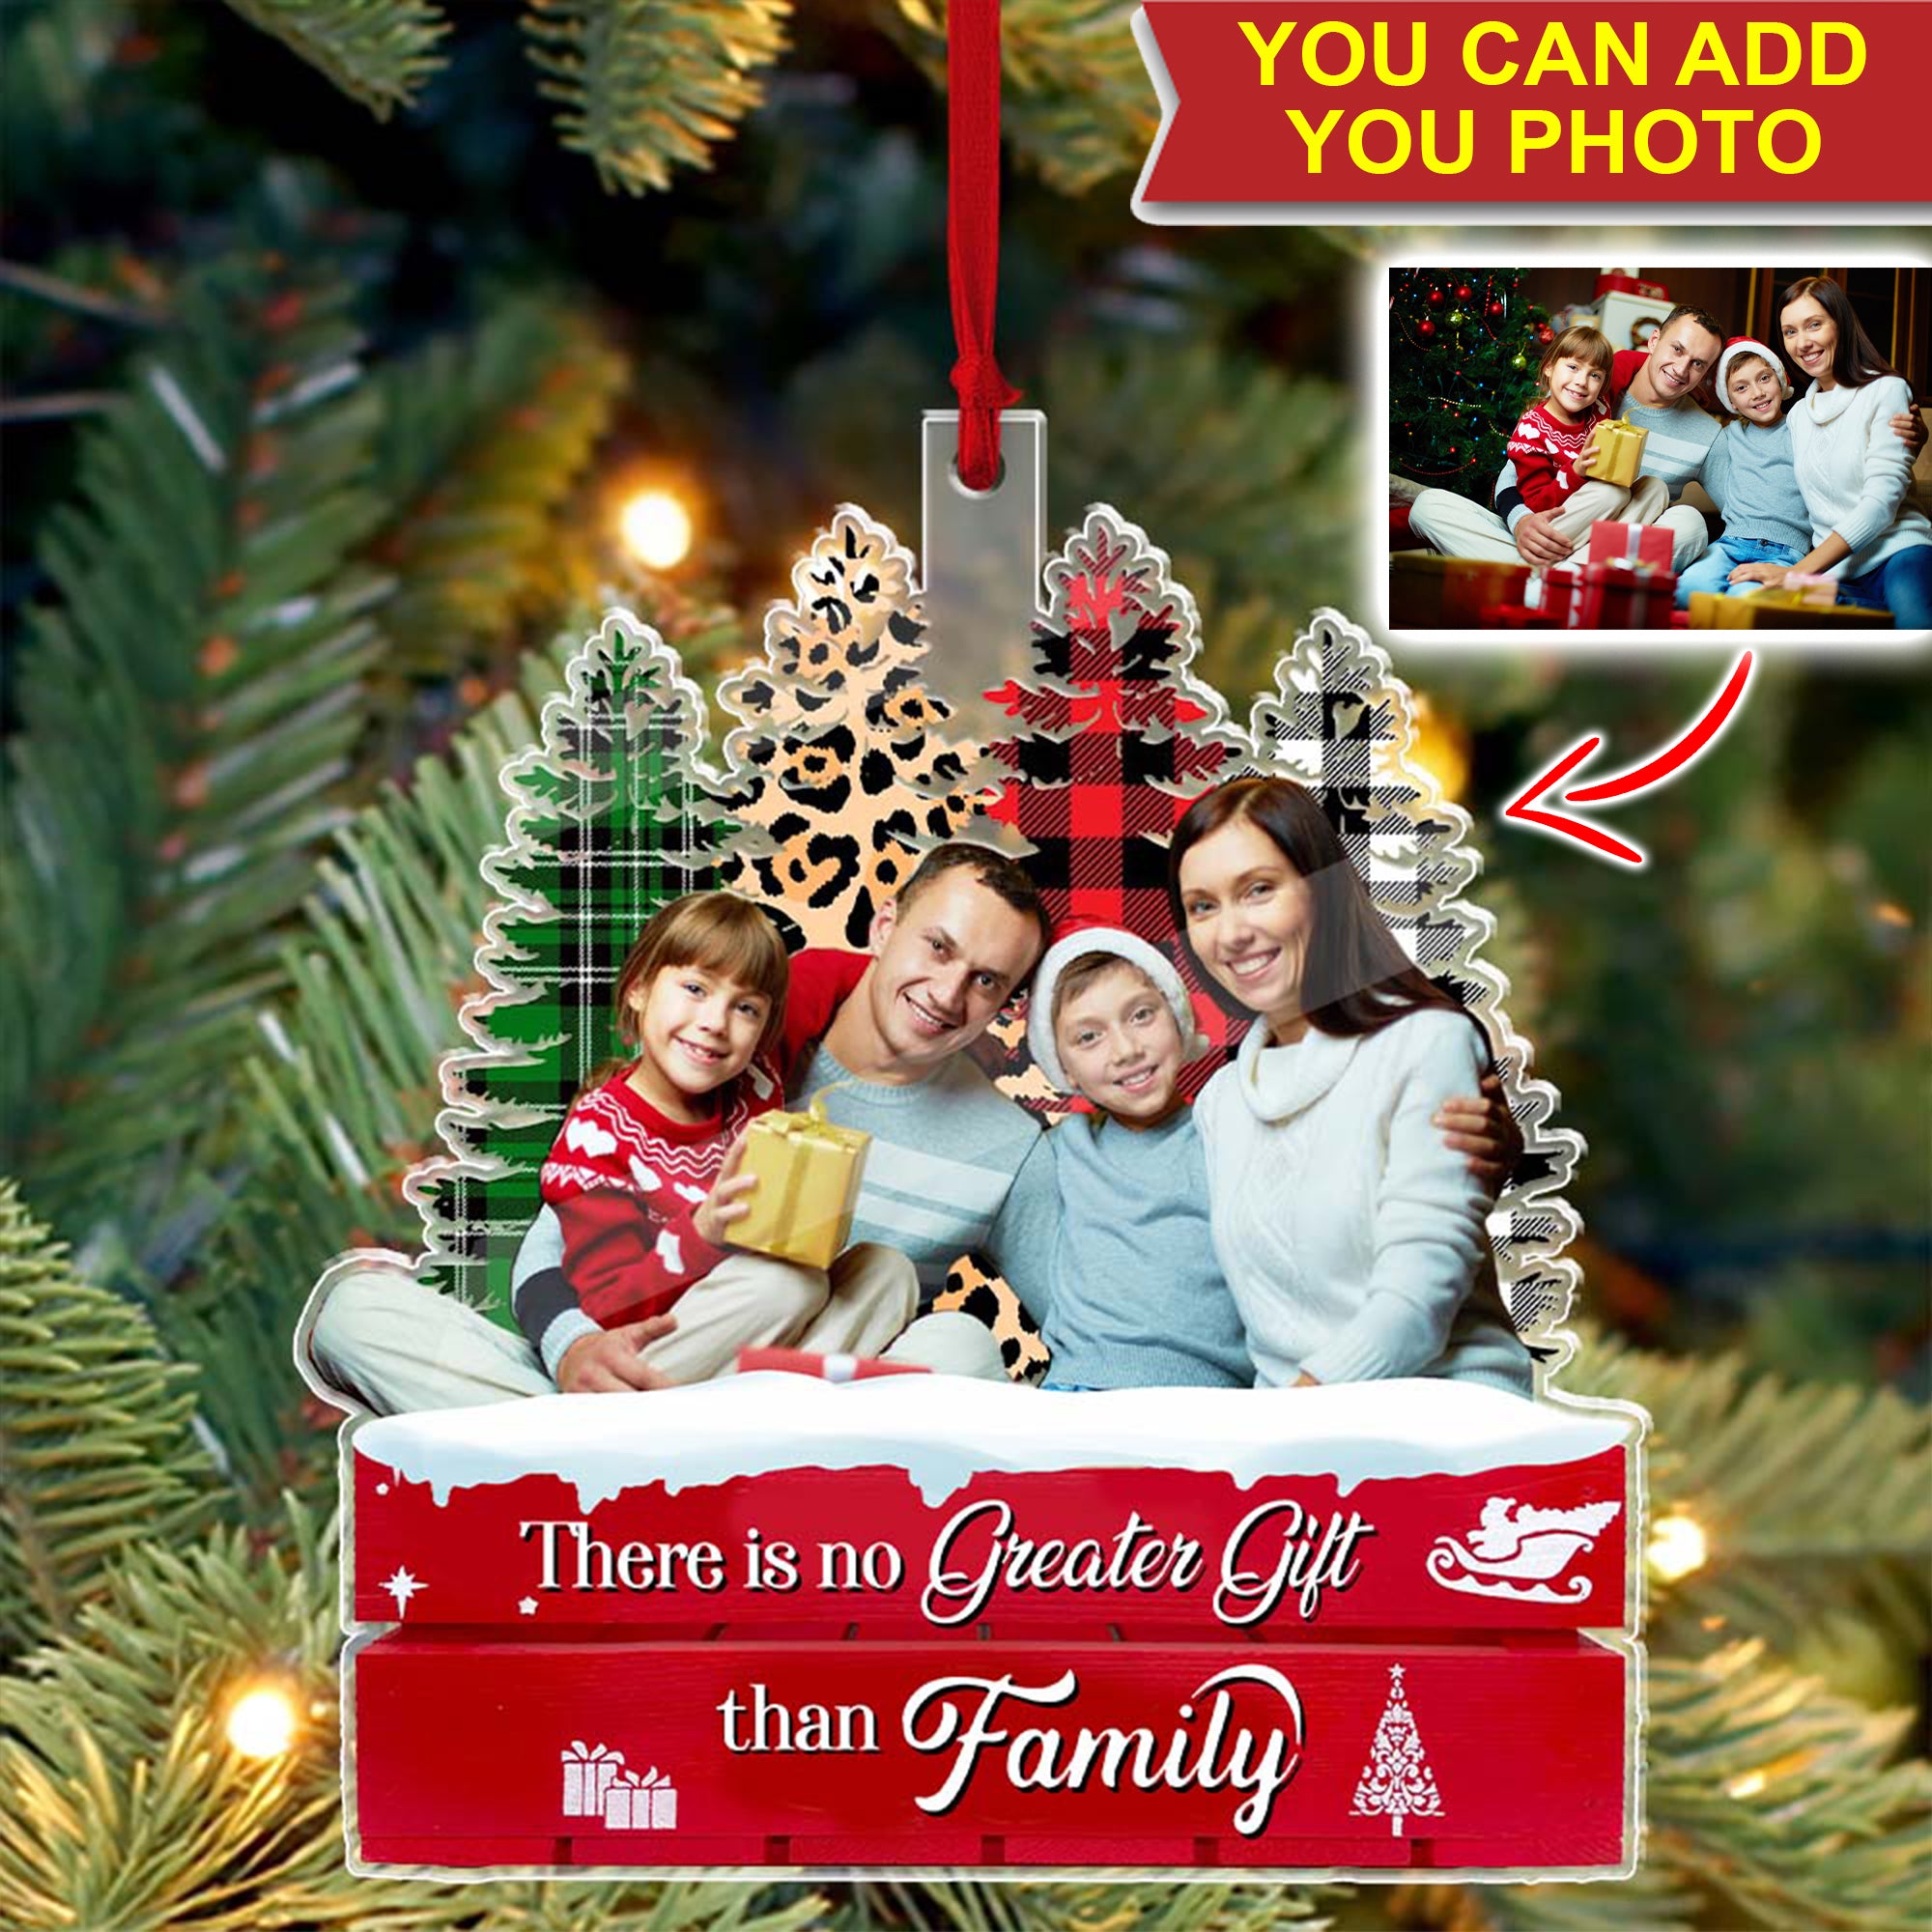 There Is No Greater Gift Than Family - Custom Photo, Personalized Acrylic Ornament - Gift For Christmas, Family Gift